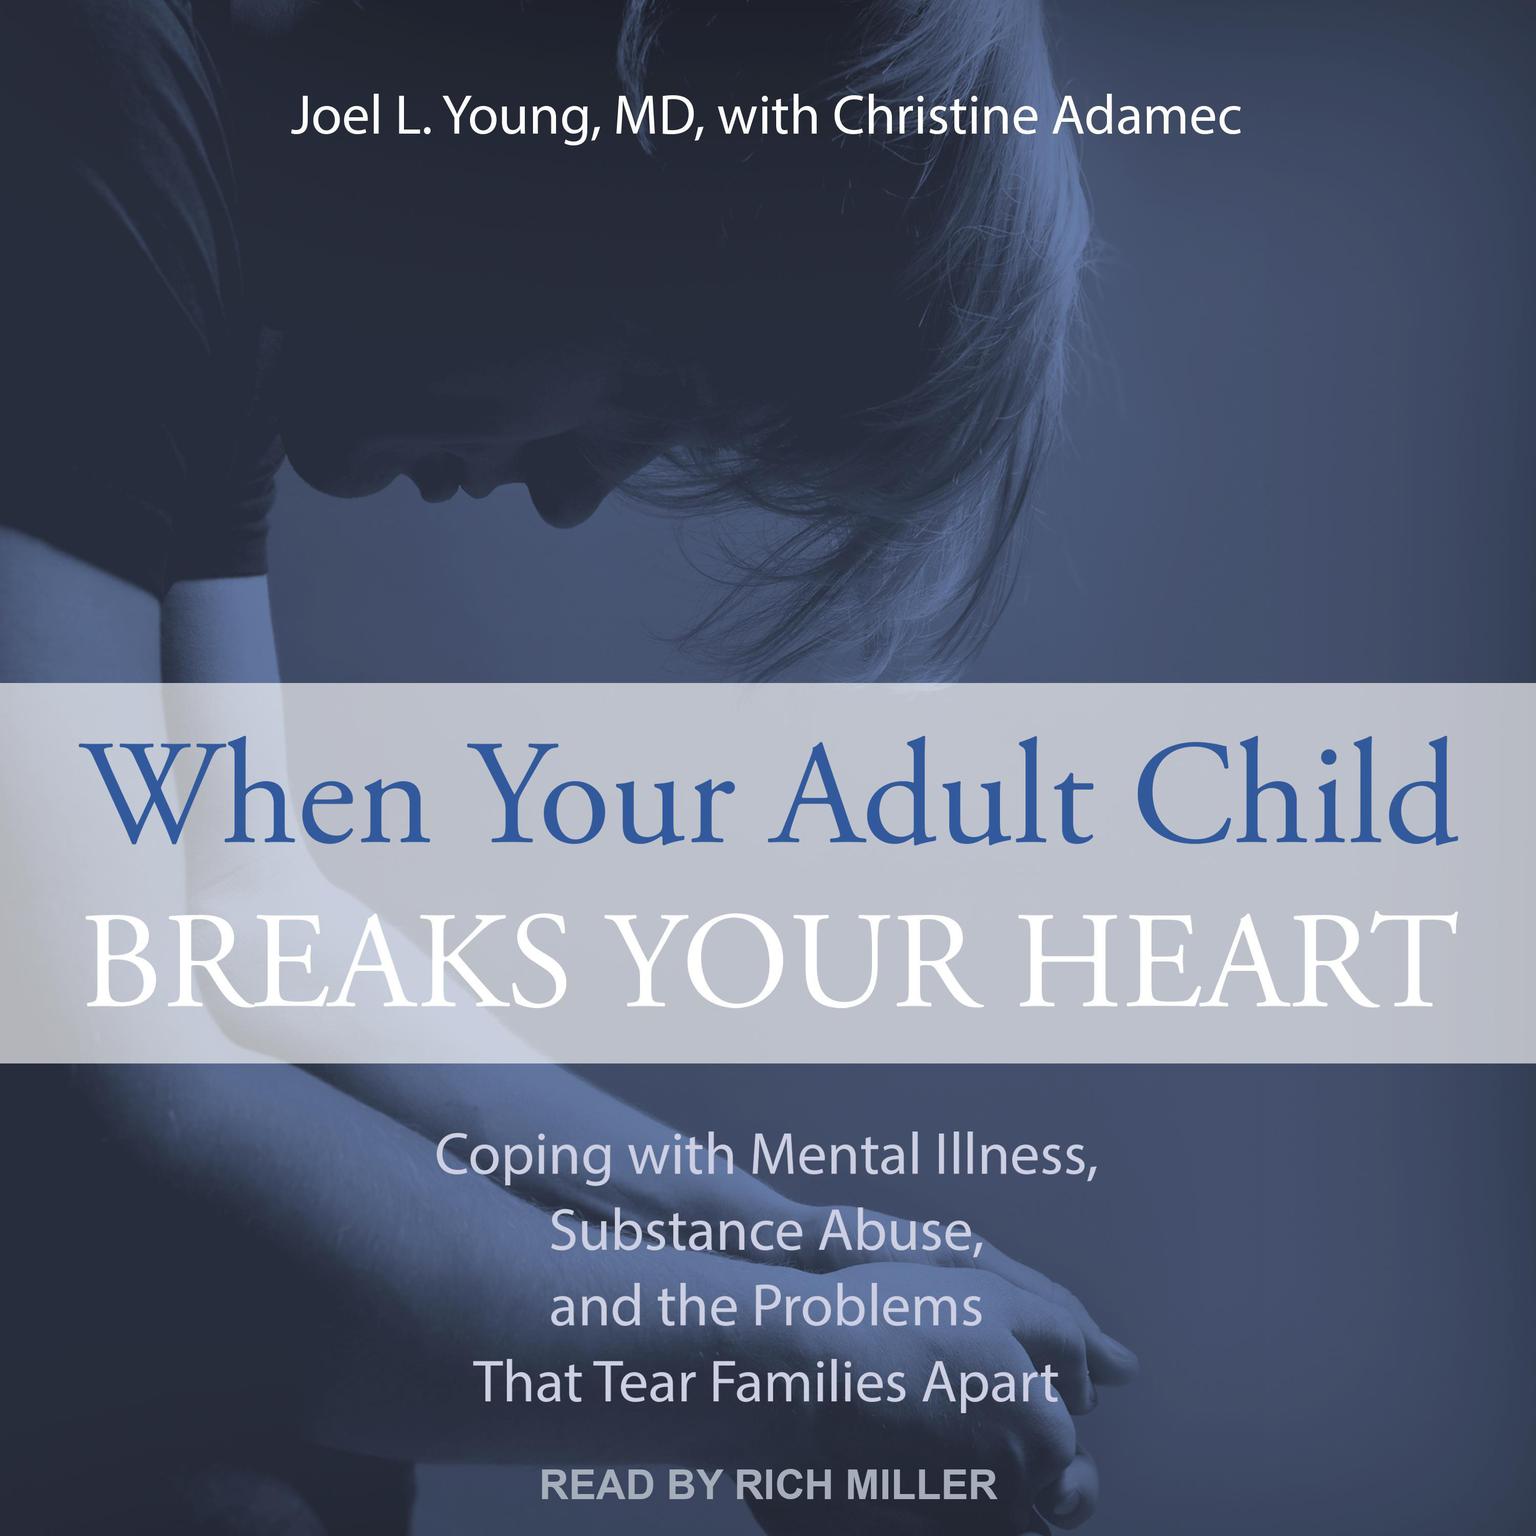 When Your Adult Child Breaks Your Heart: Coping With Mental Illness, Substance Abuse, And The Problems That Tear Families Apart Audiobook, by Joel Young